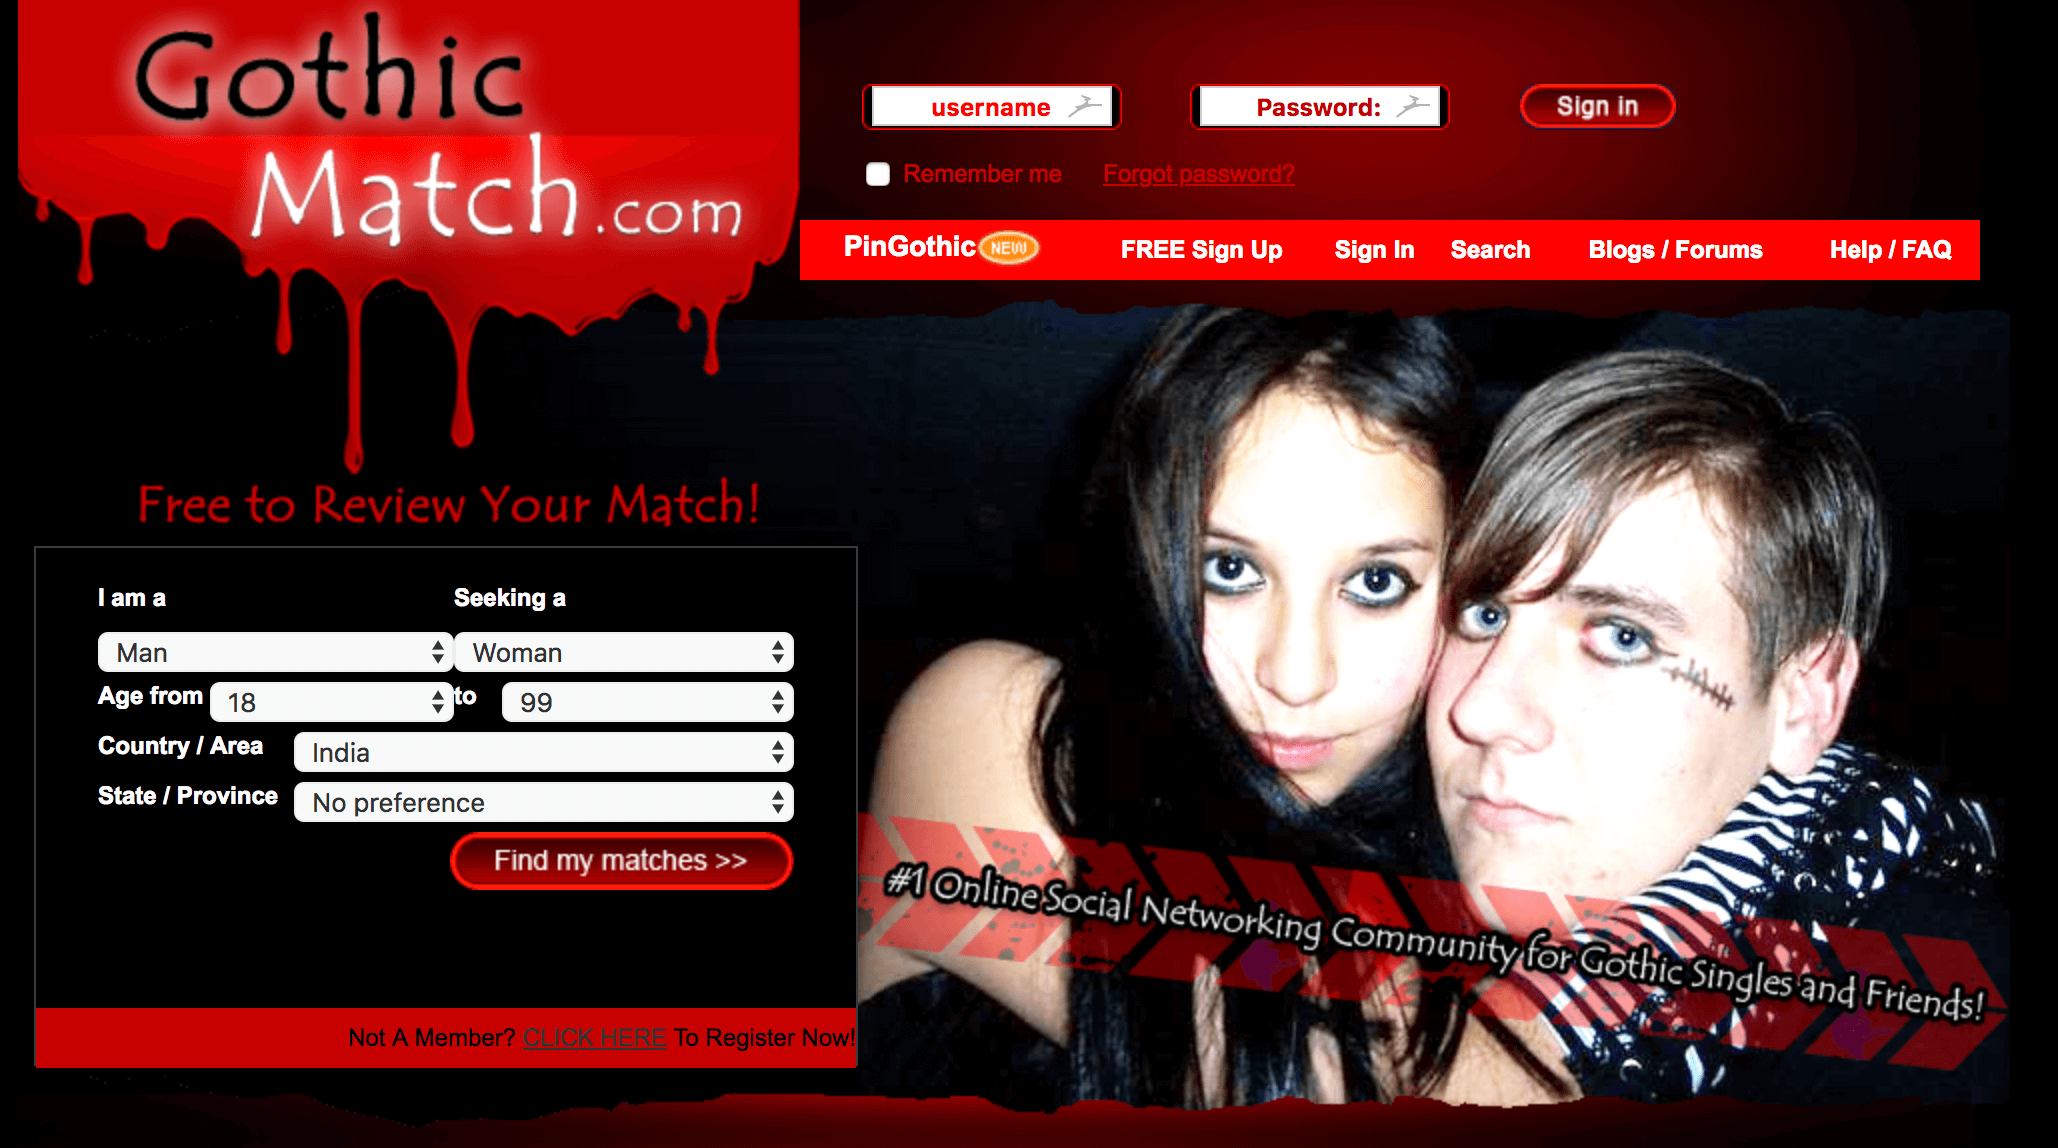 So what are the best dating sites for geeks? 